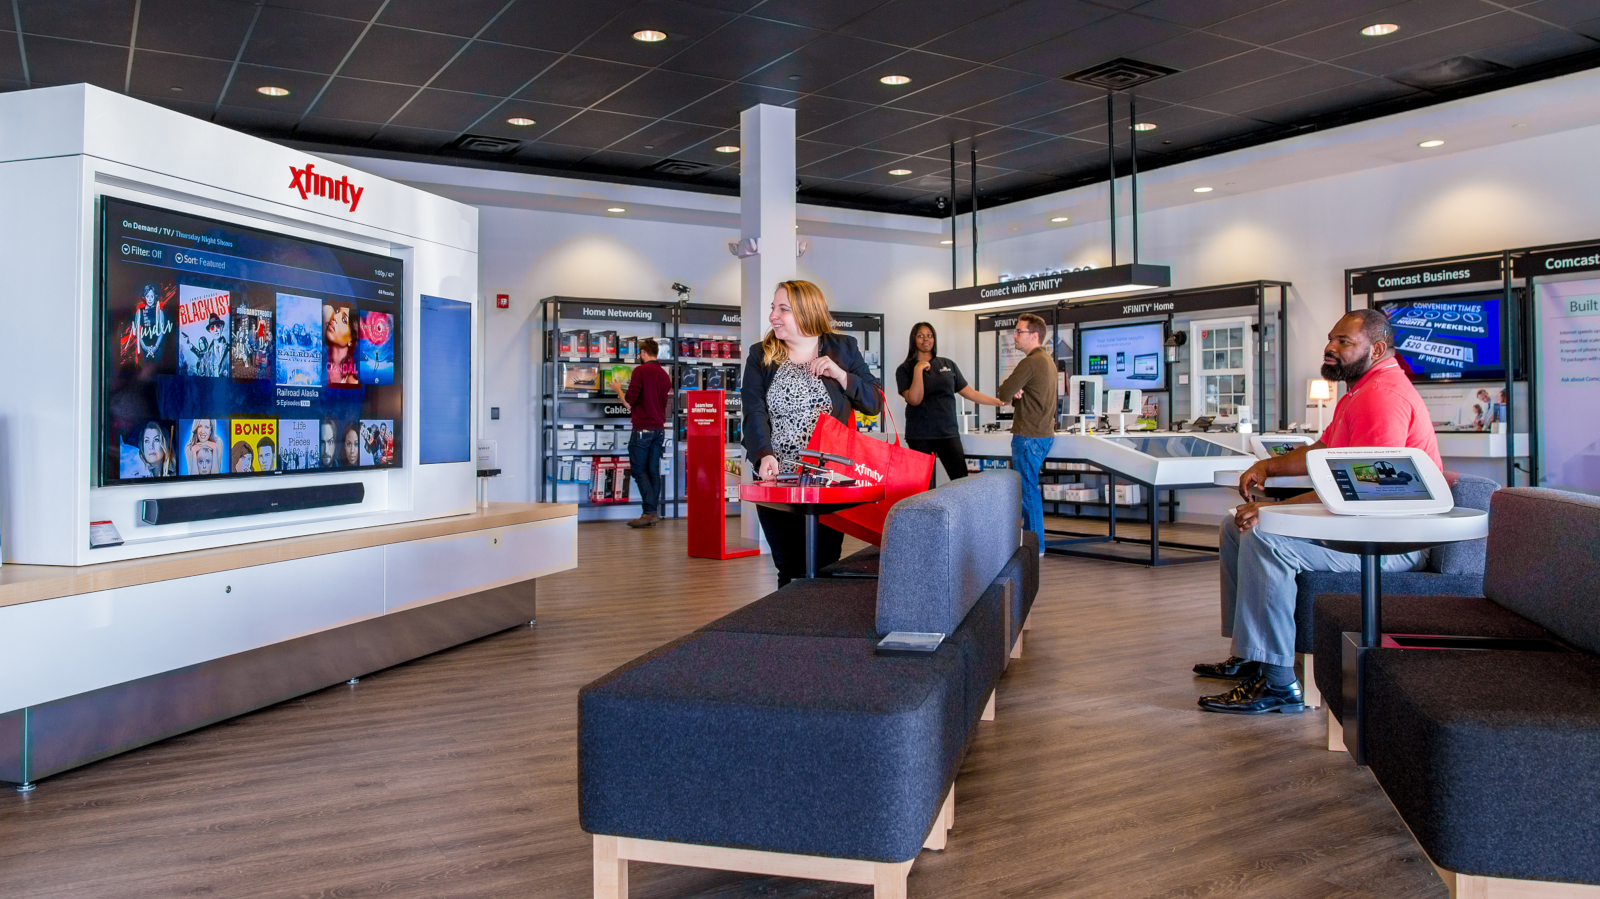 Comcast to Open New Xfinity Store Near Memphis